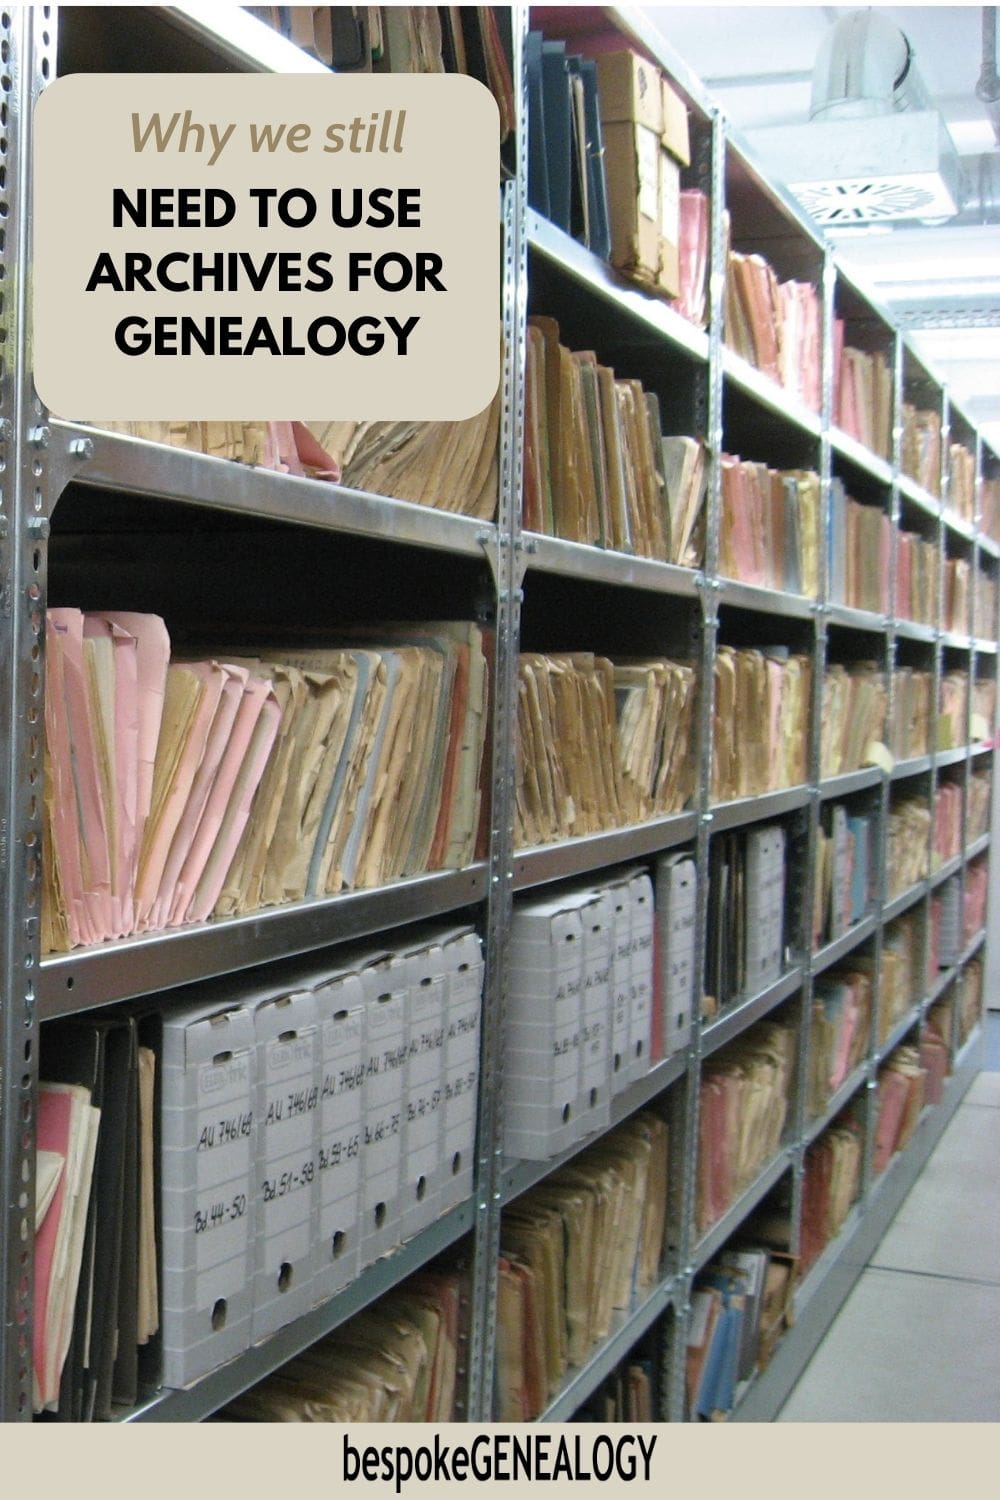 Why we still need to use archives for genealogy. Photo of some packed shelves of documents in an archive.